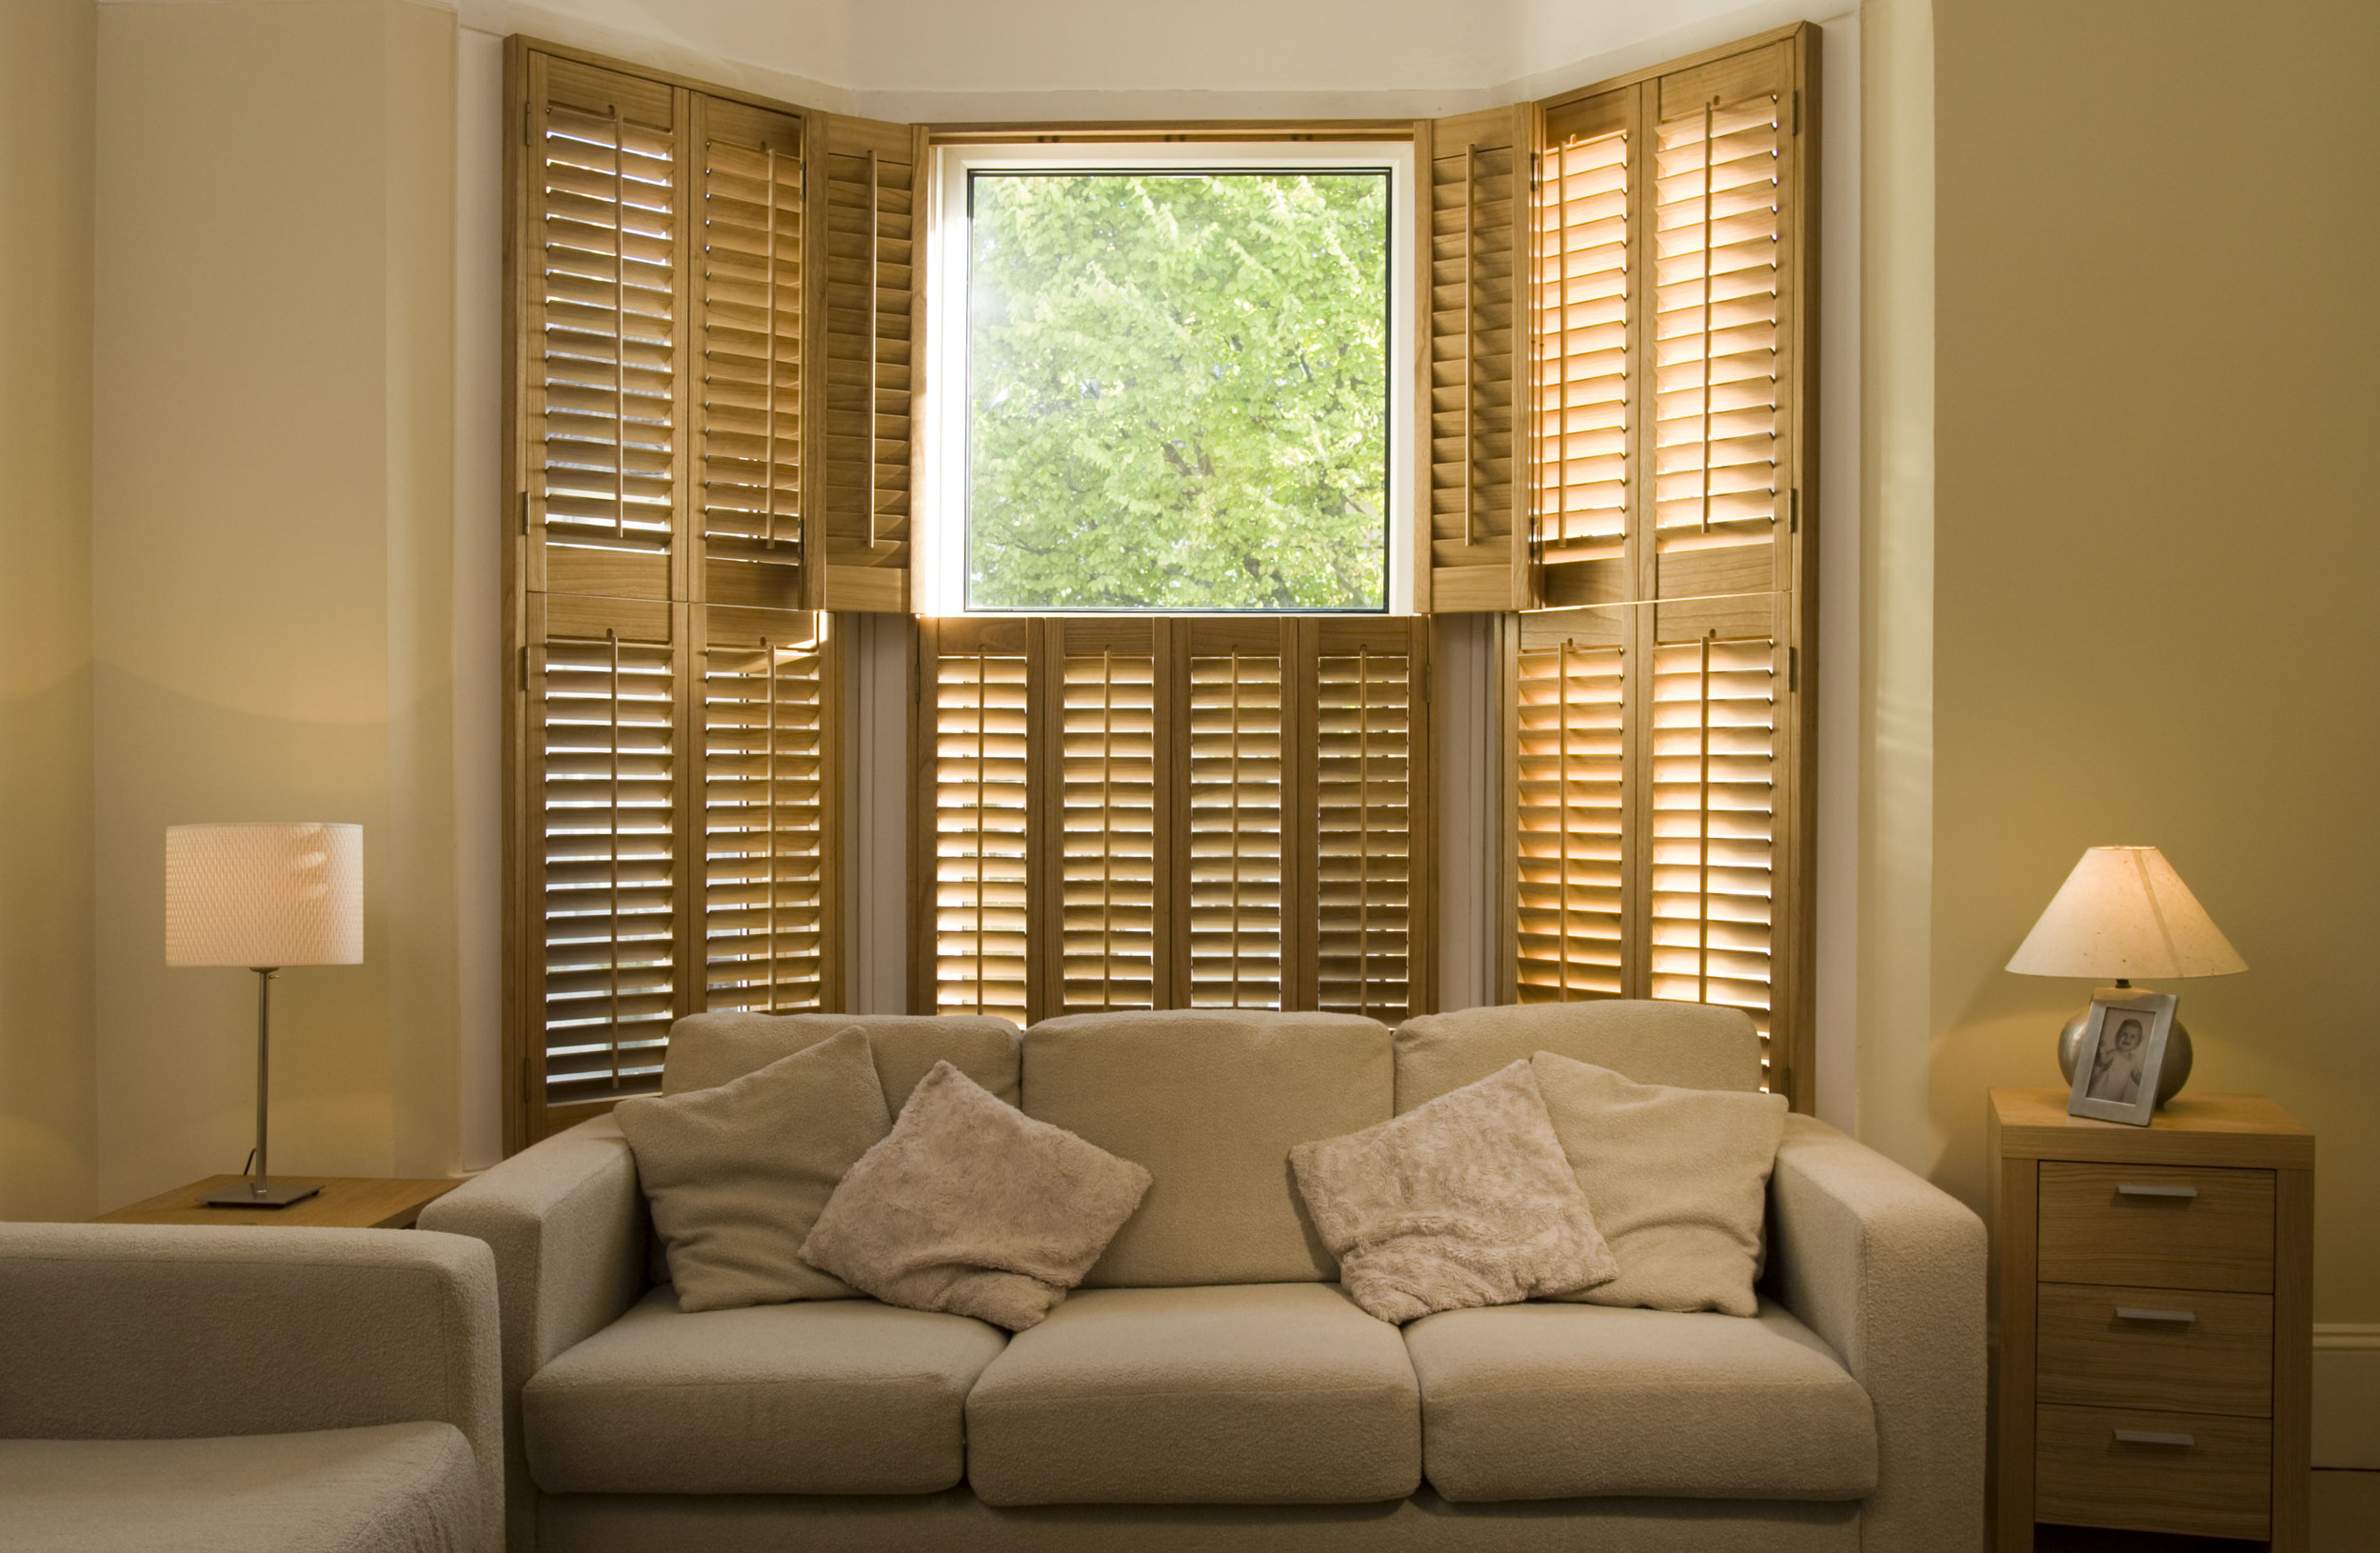 Tier on tier wooden shutters Bournemouth Dorset